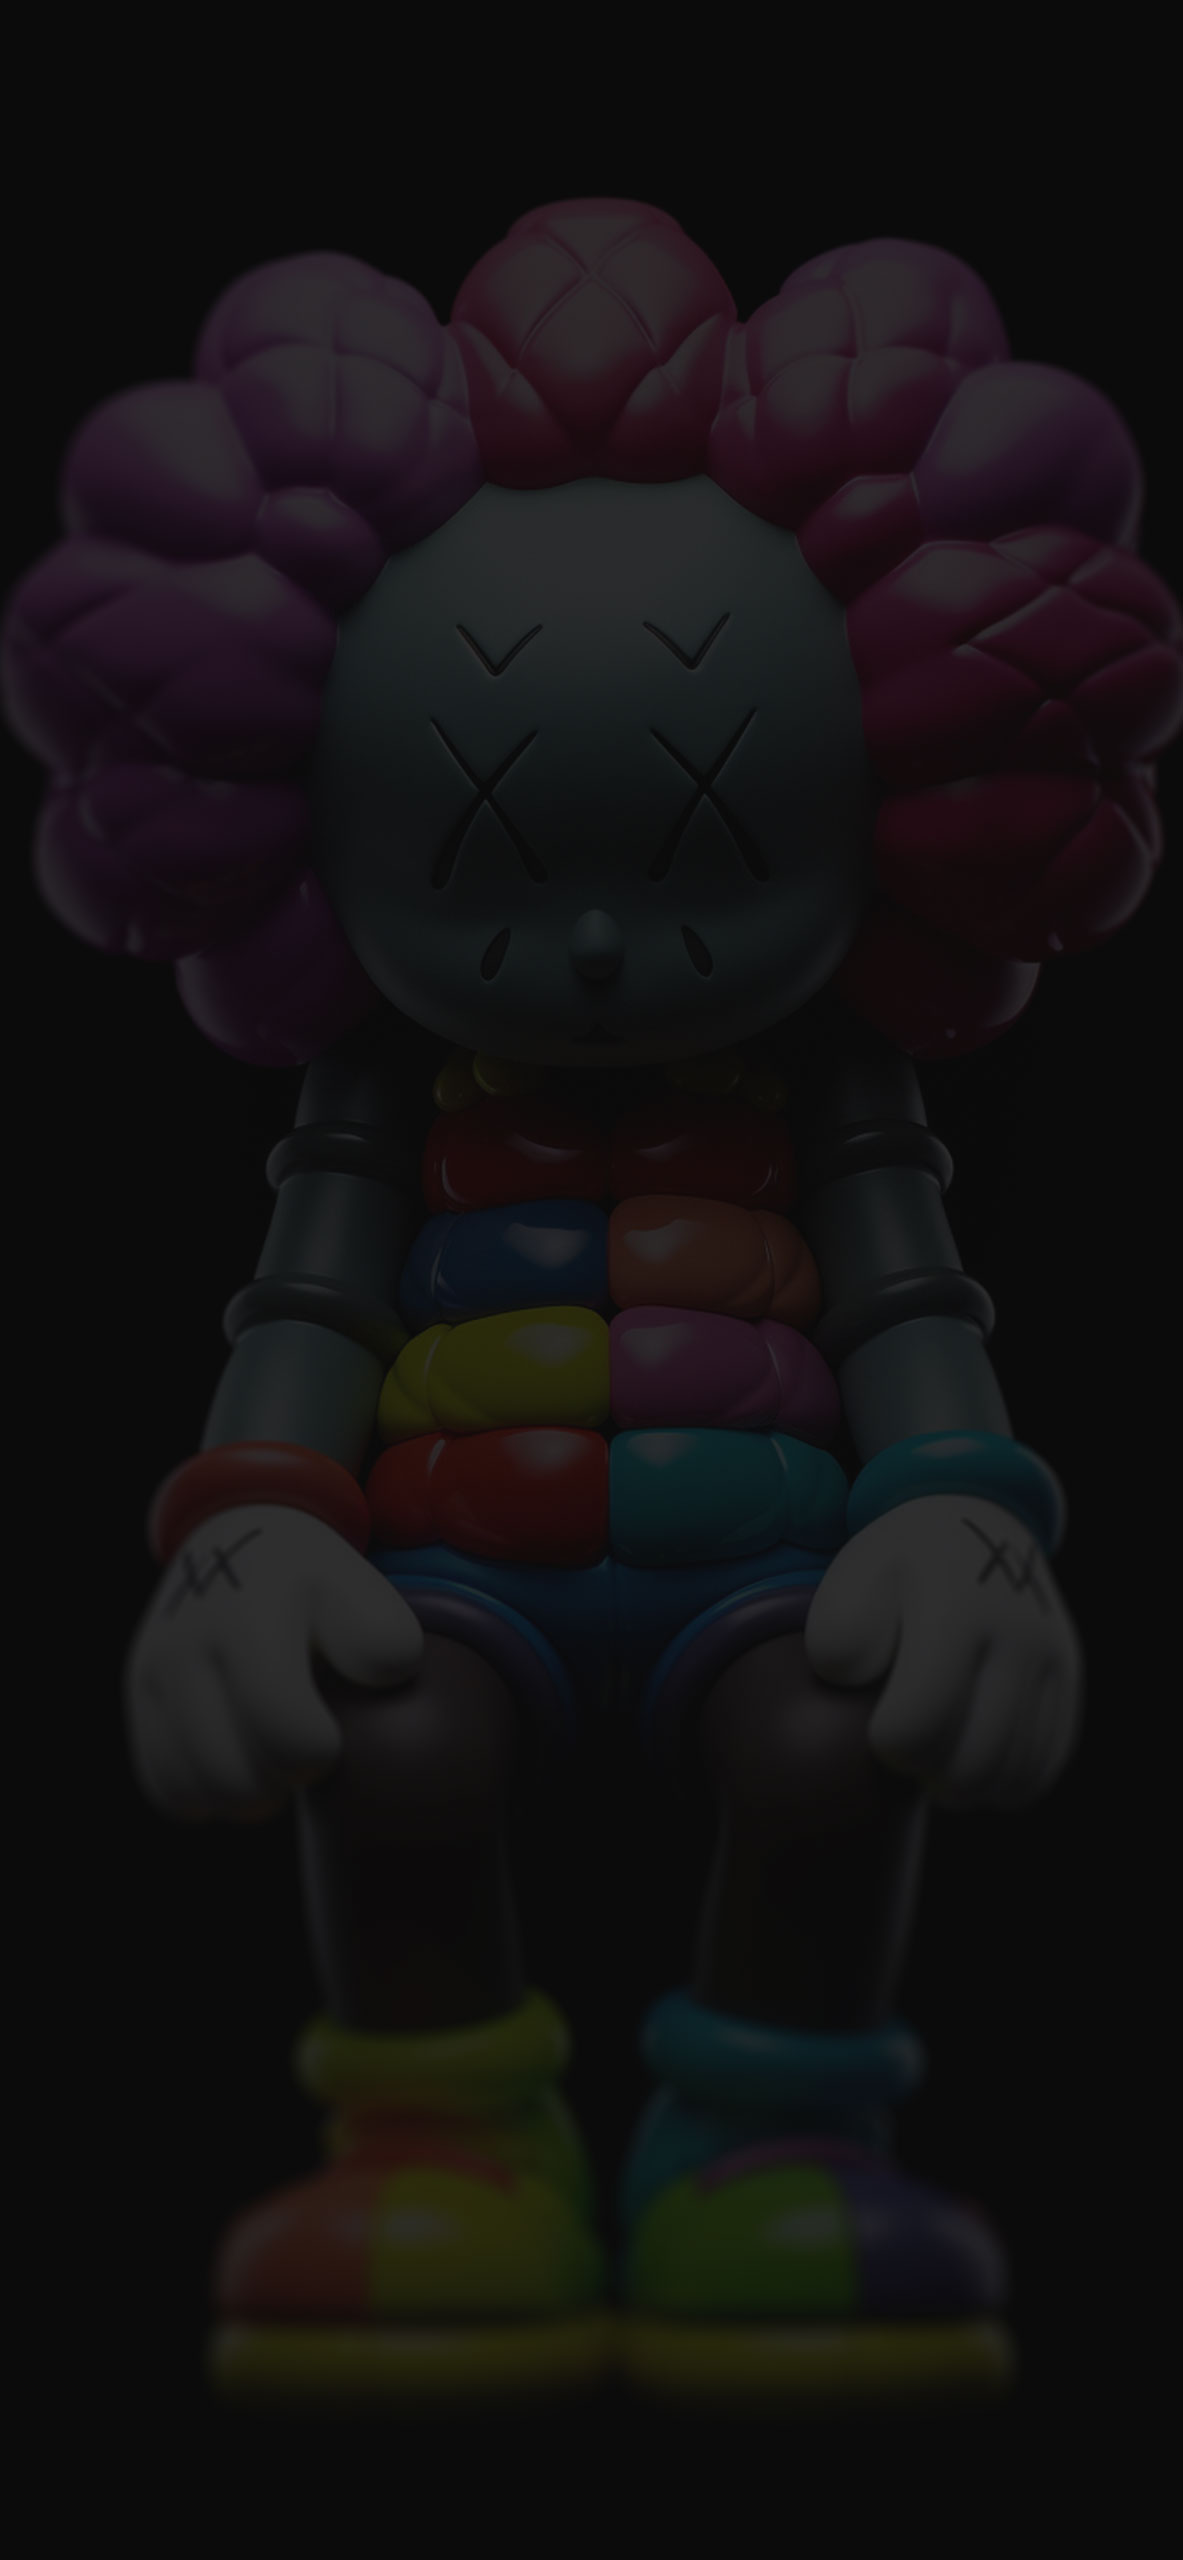 I Re-Created a Popular KAWS Wallpaper into a 3D Model with 